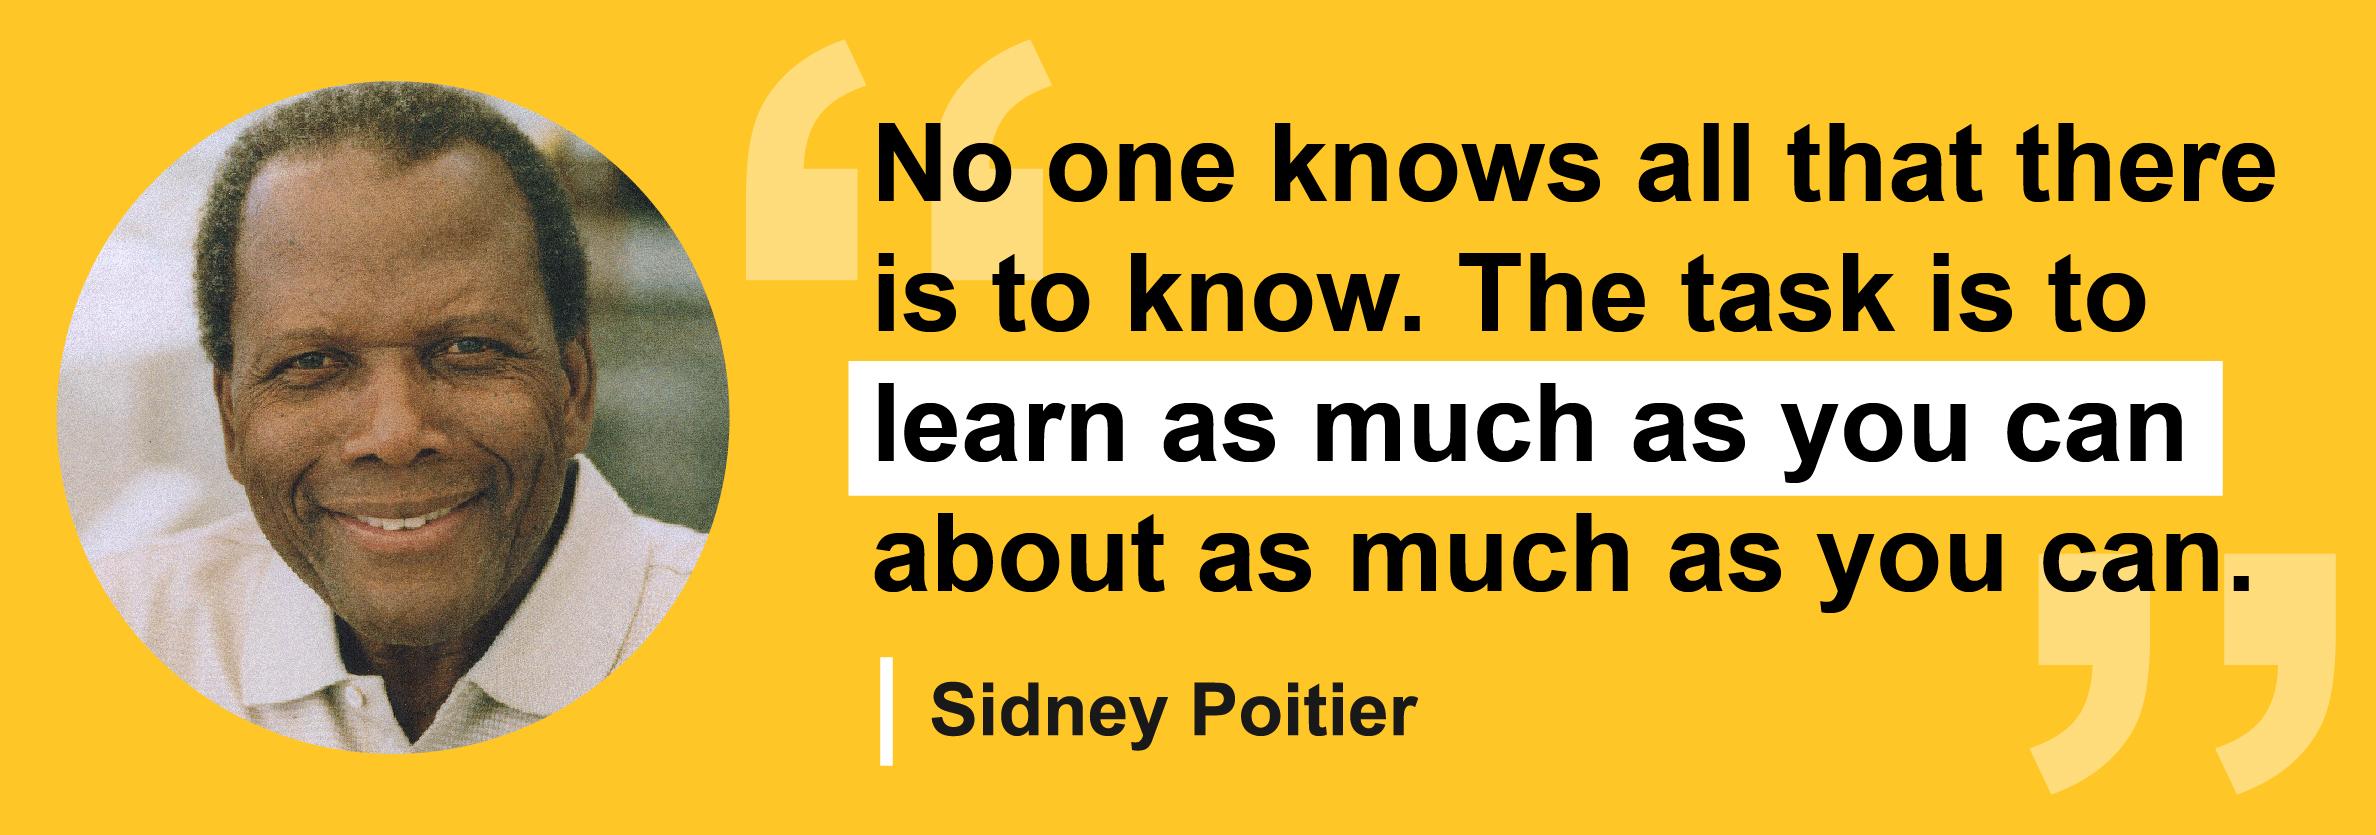 Quote by Sidney Poitier " No one knows all that there is to know. The task is to learn as much as you can about as much as you can."